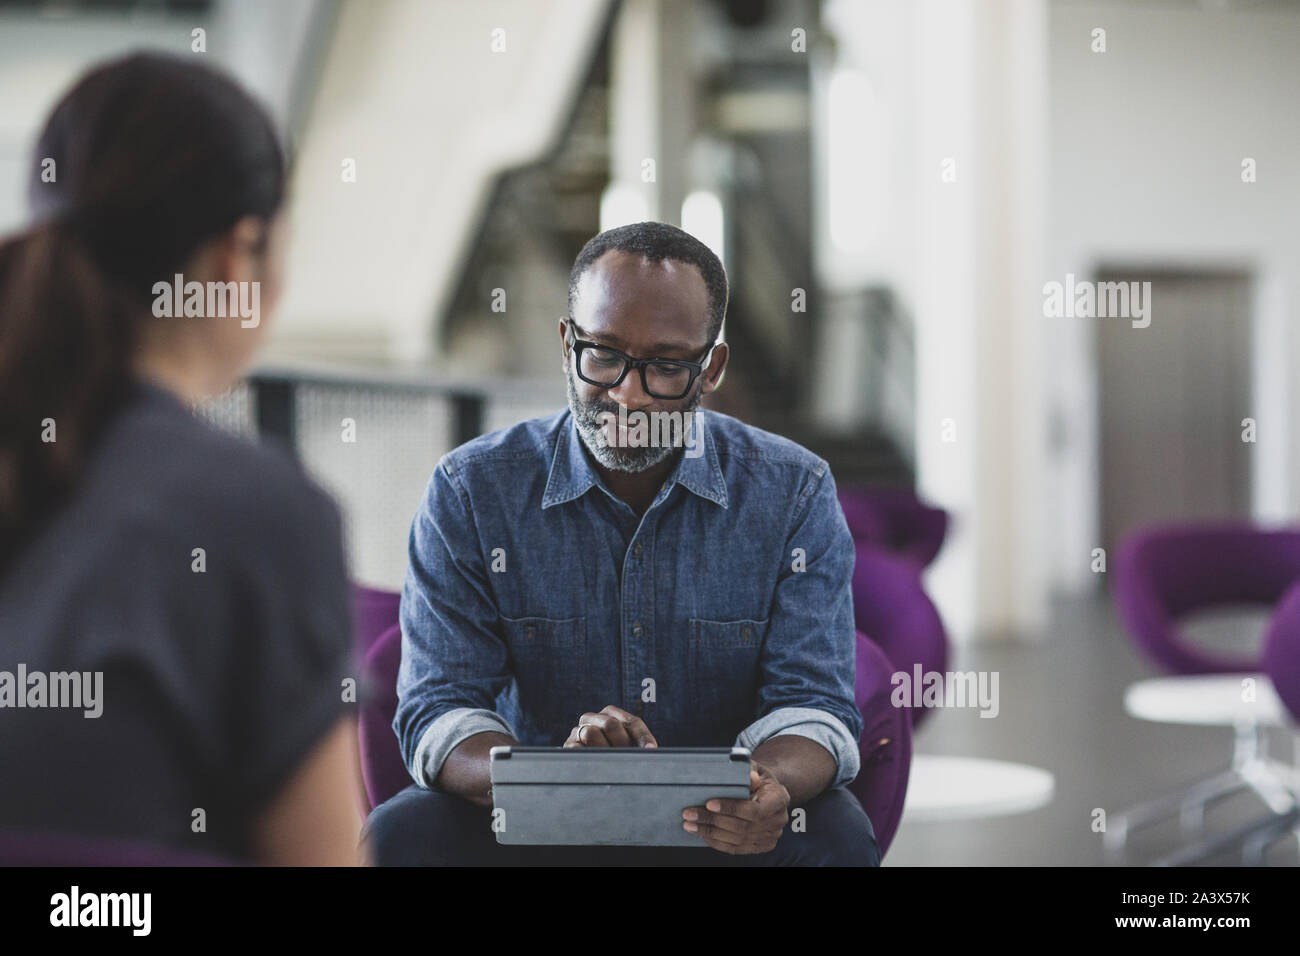 African American businessman using a digital tablet in a meeting Banque D'Images